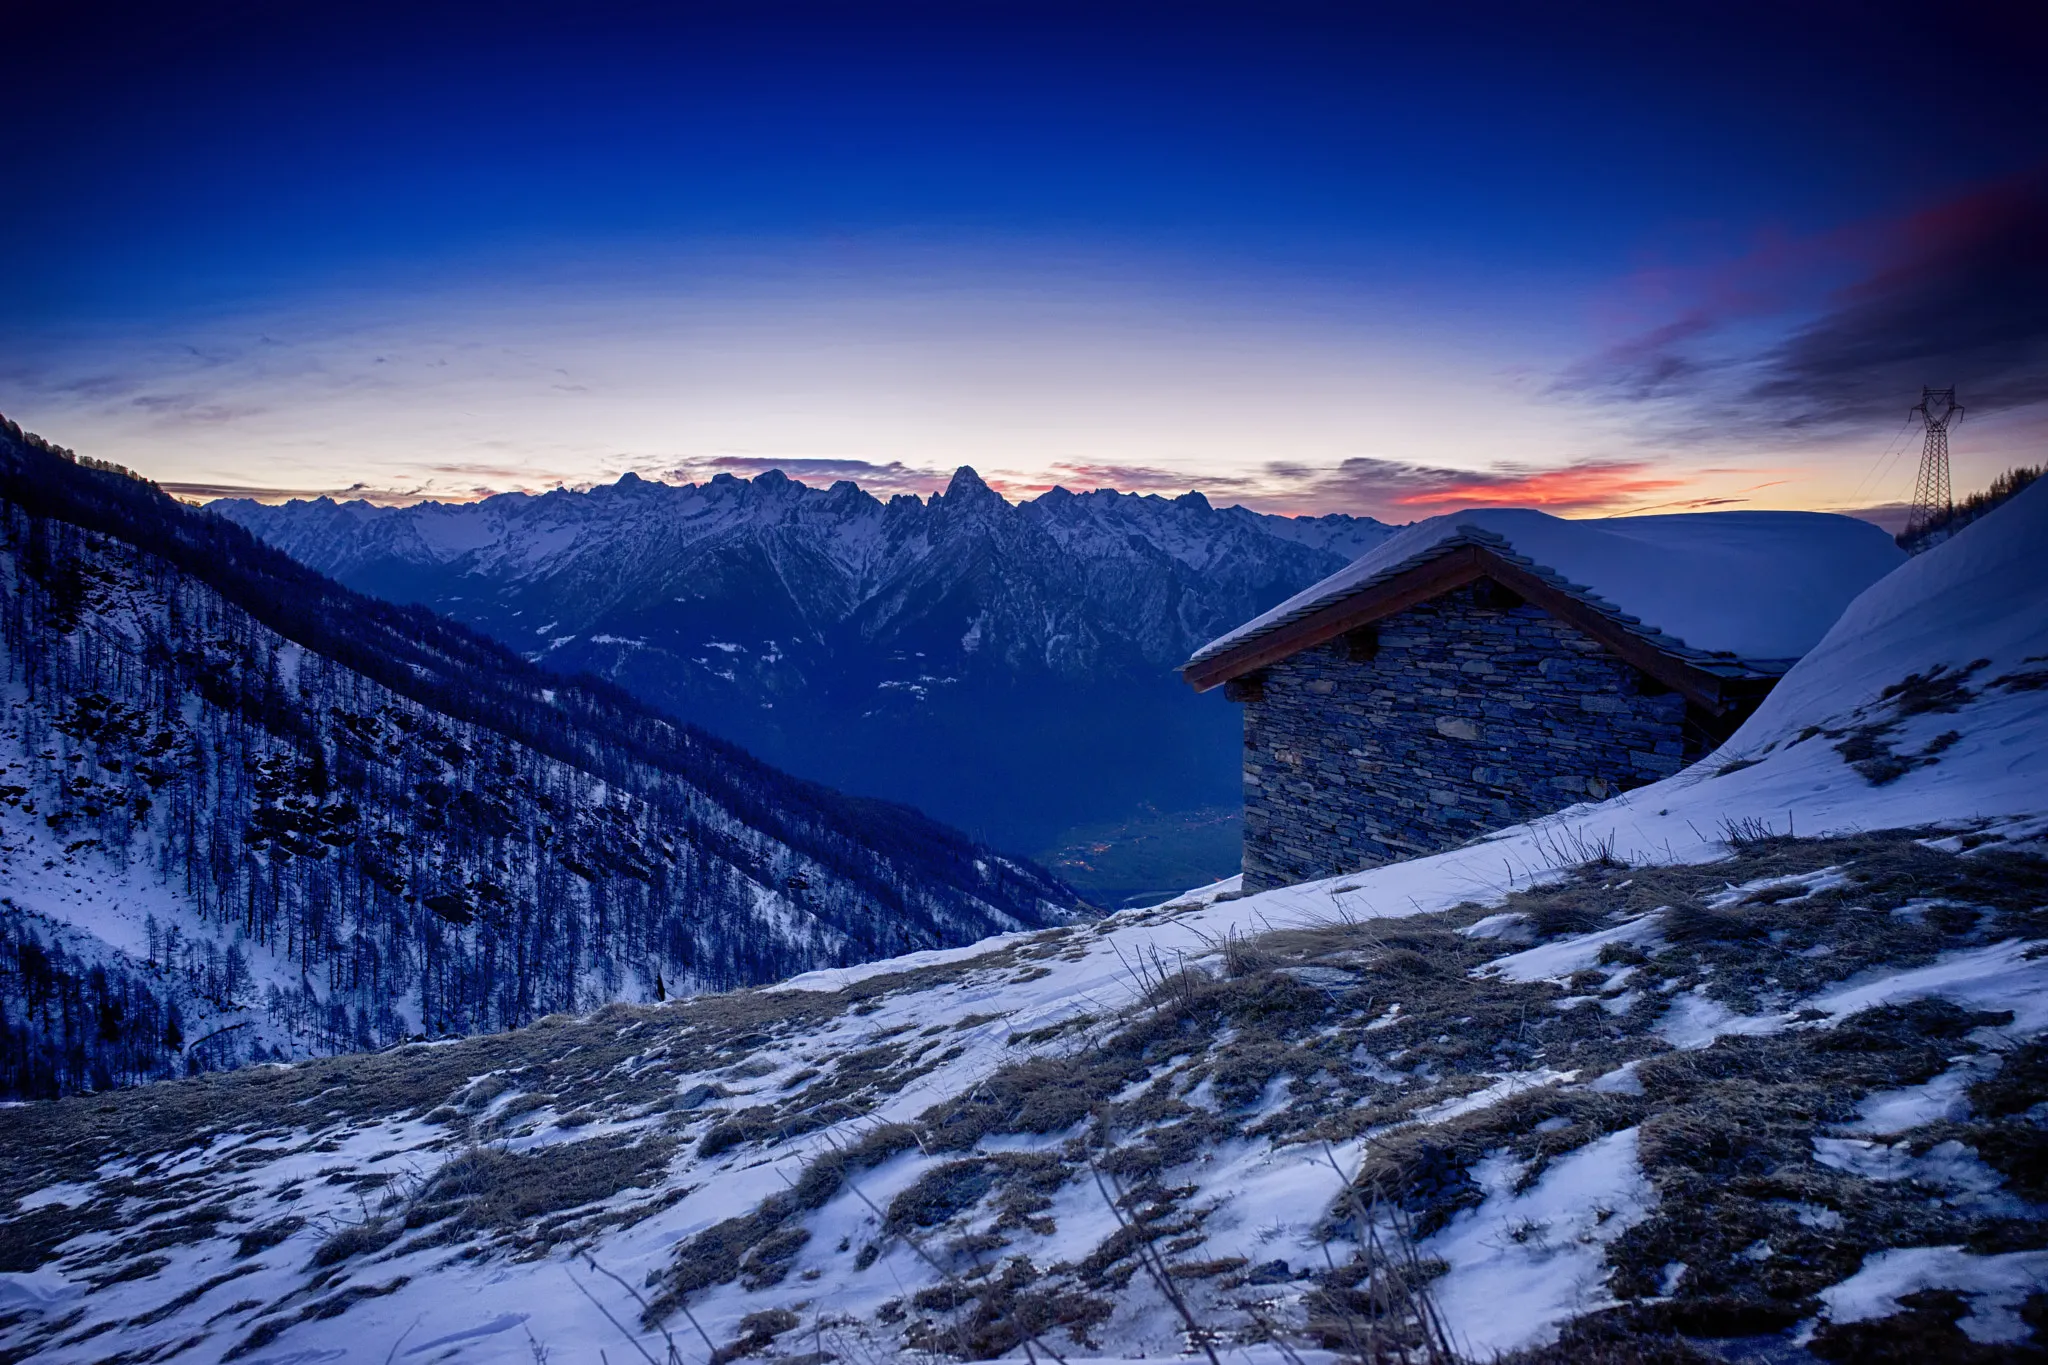 Photo showing: 500px provided description: Bivacco Forcola, Val Chiavenna (Italy)

After having spent the night sleeping in the house visible in the picture, the new day welcomed me with a beautiful and peaceful sunrise. [#landscape ,#sunrise ,#mountains ,#snow ,#alps ,#dusk ,#hut]